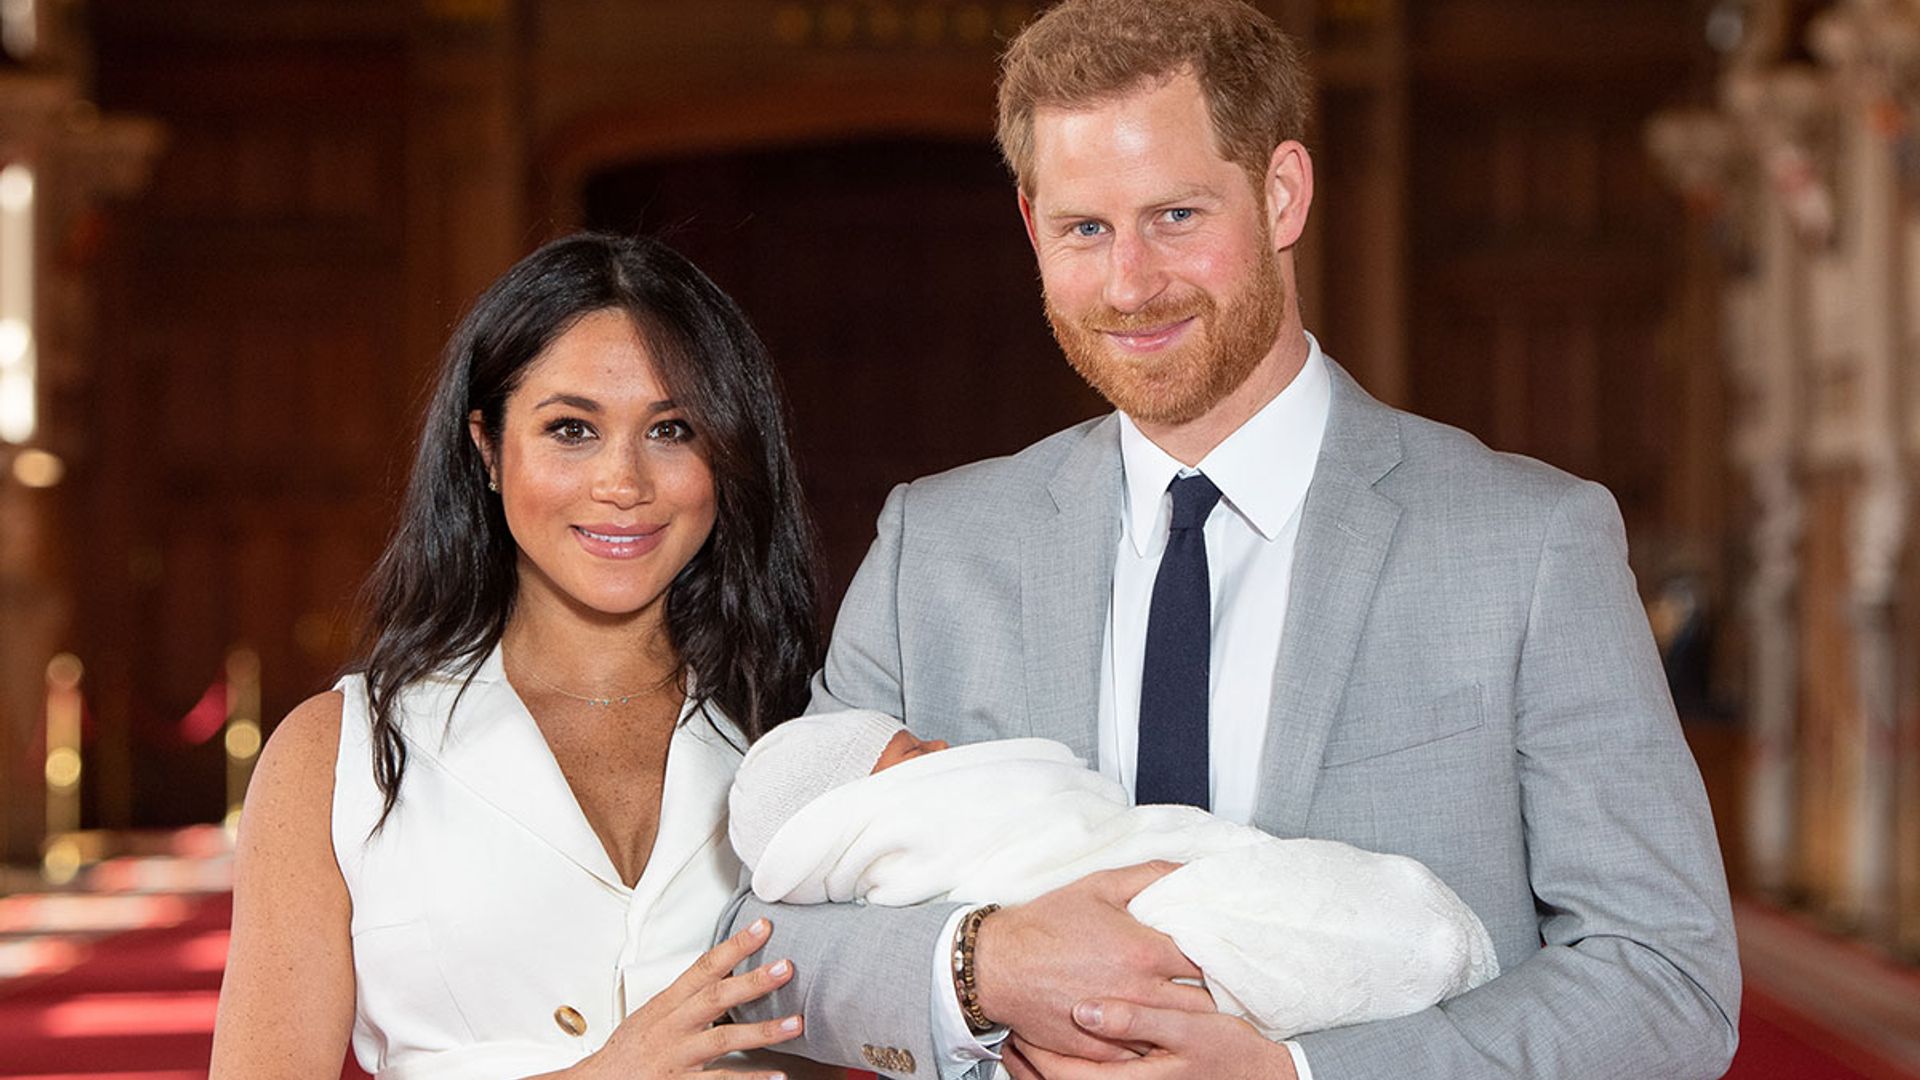 The reason why Meghan Markle wanted son Archie to be a Prince